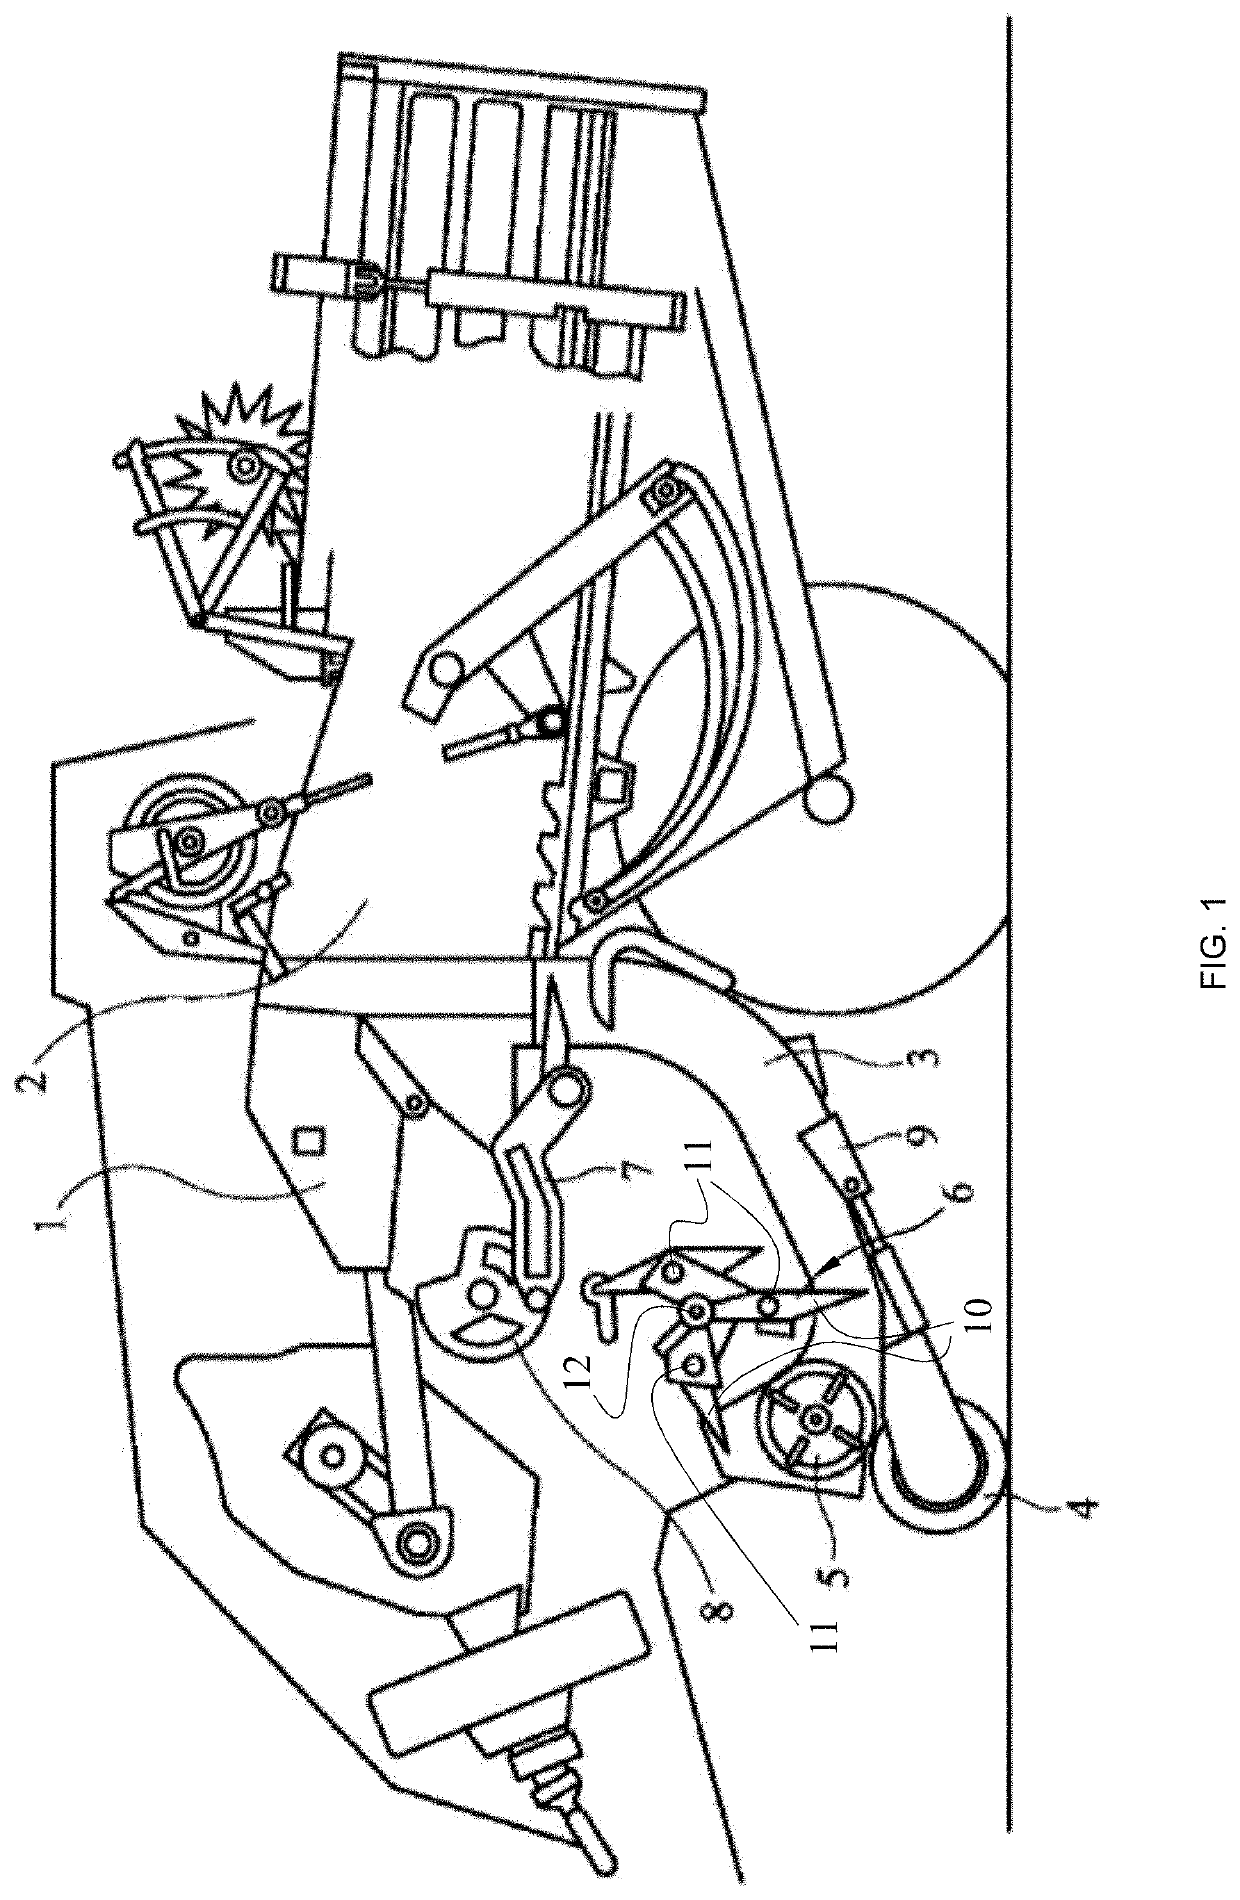 Crank-operated packer mechanism for an agricultural baler